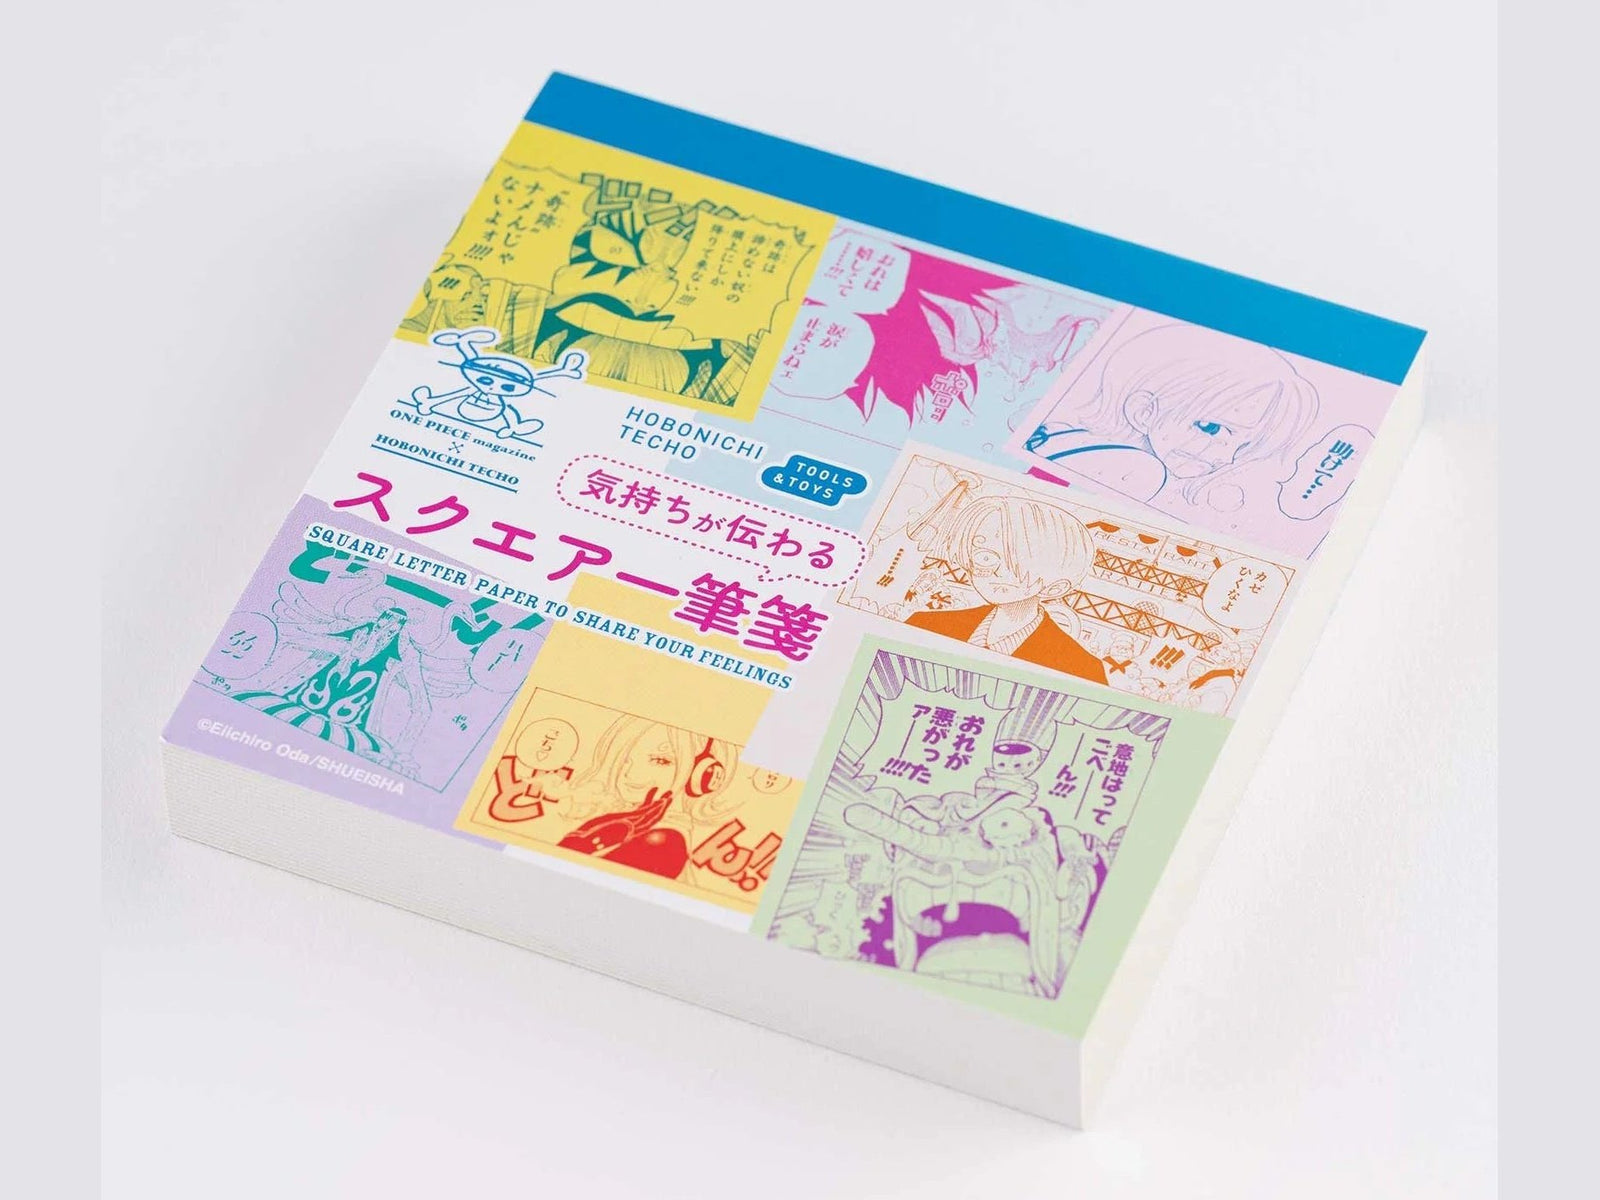 Hobonichi ONE PIECE magazine: Square Letter Paper to Share Your Feelings